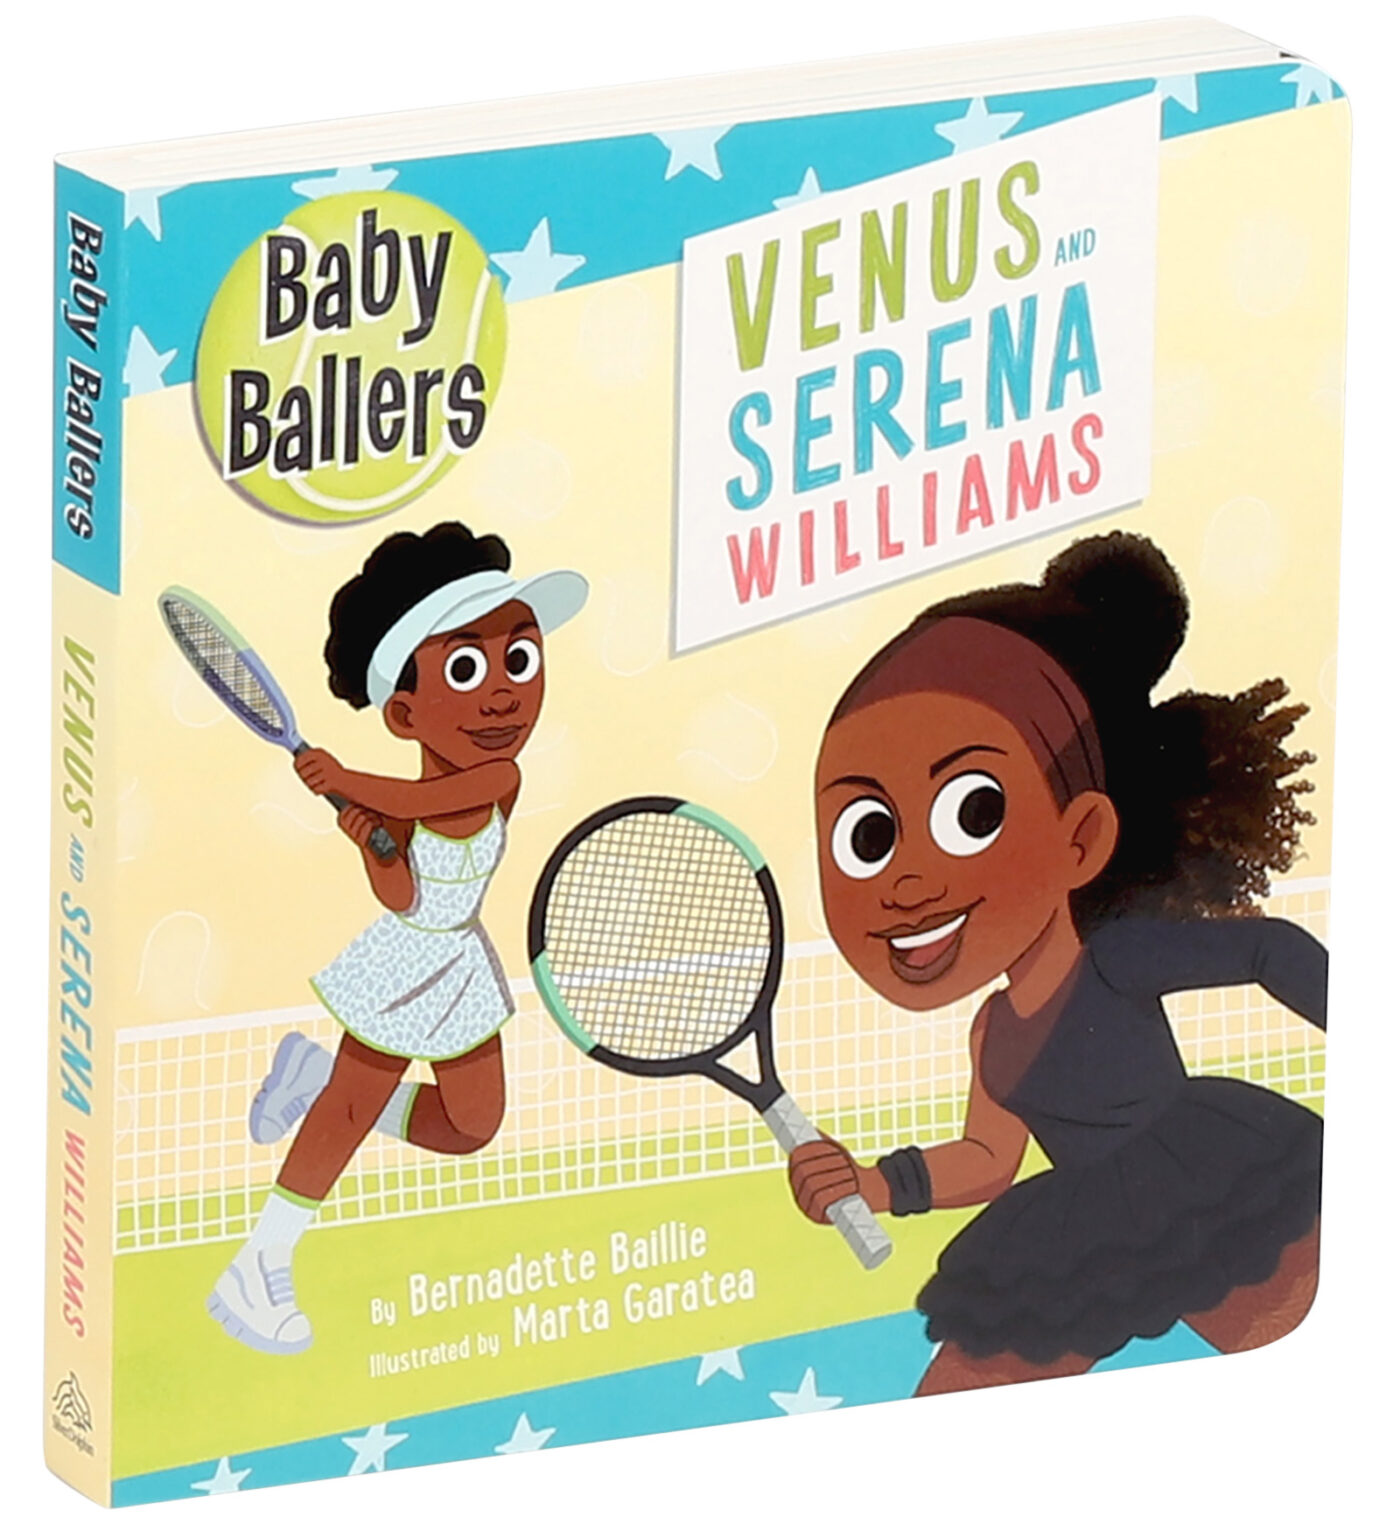 3D image of board book Baby Ballers: Venus and Serena Williams, showing drawings of young Venus and Serena playing tennis